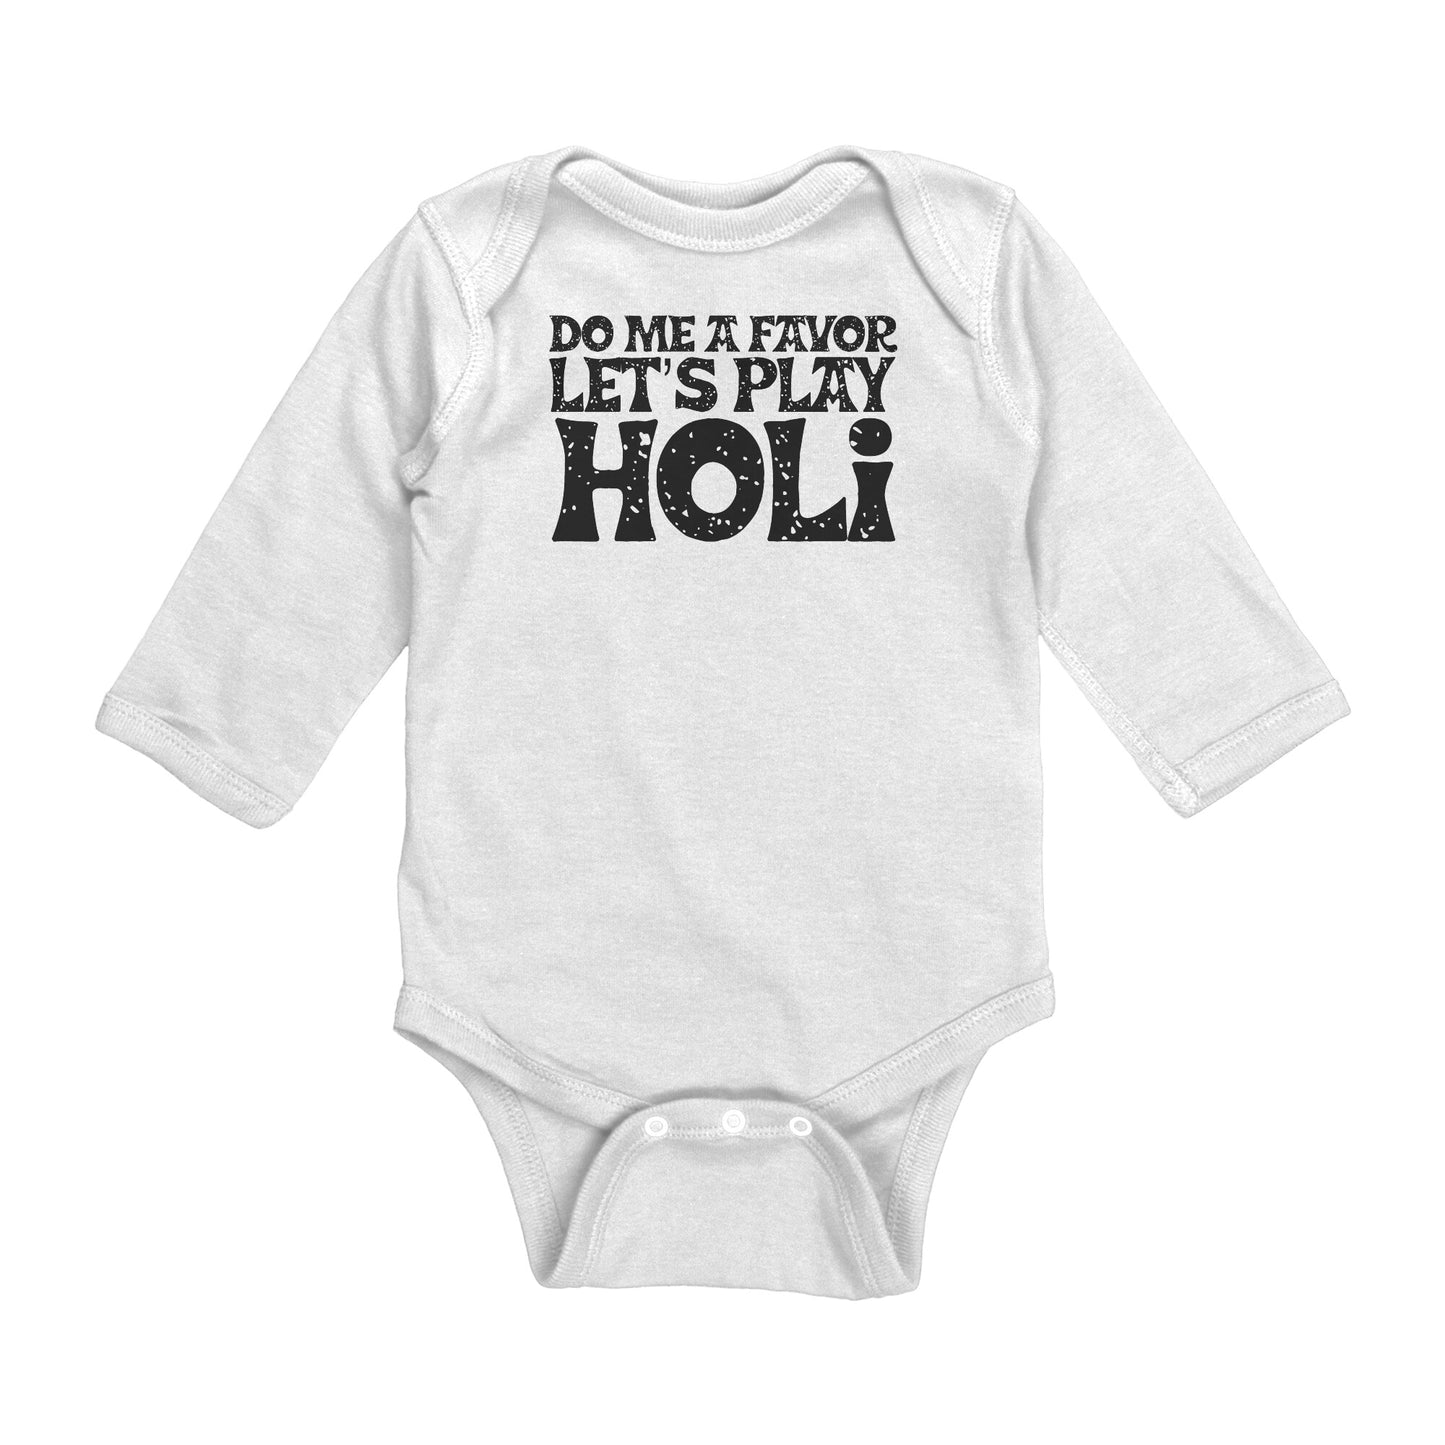 Do Me a Favor Let's Play Holi Baby Onsies